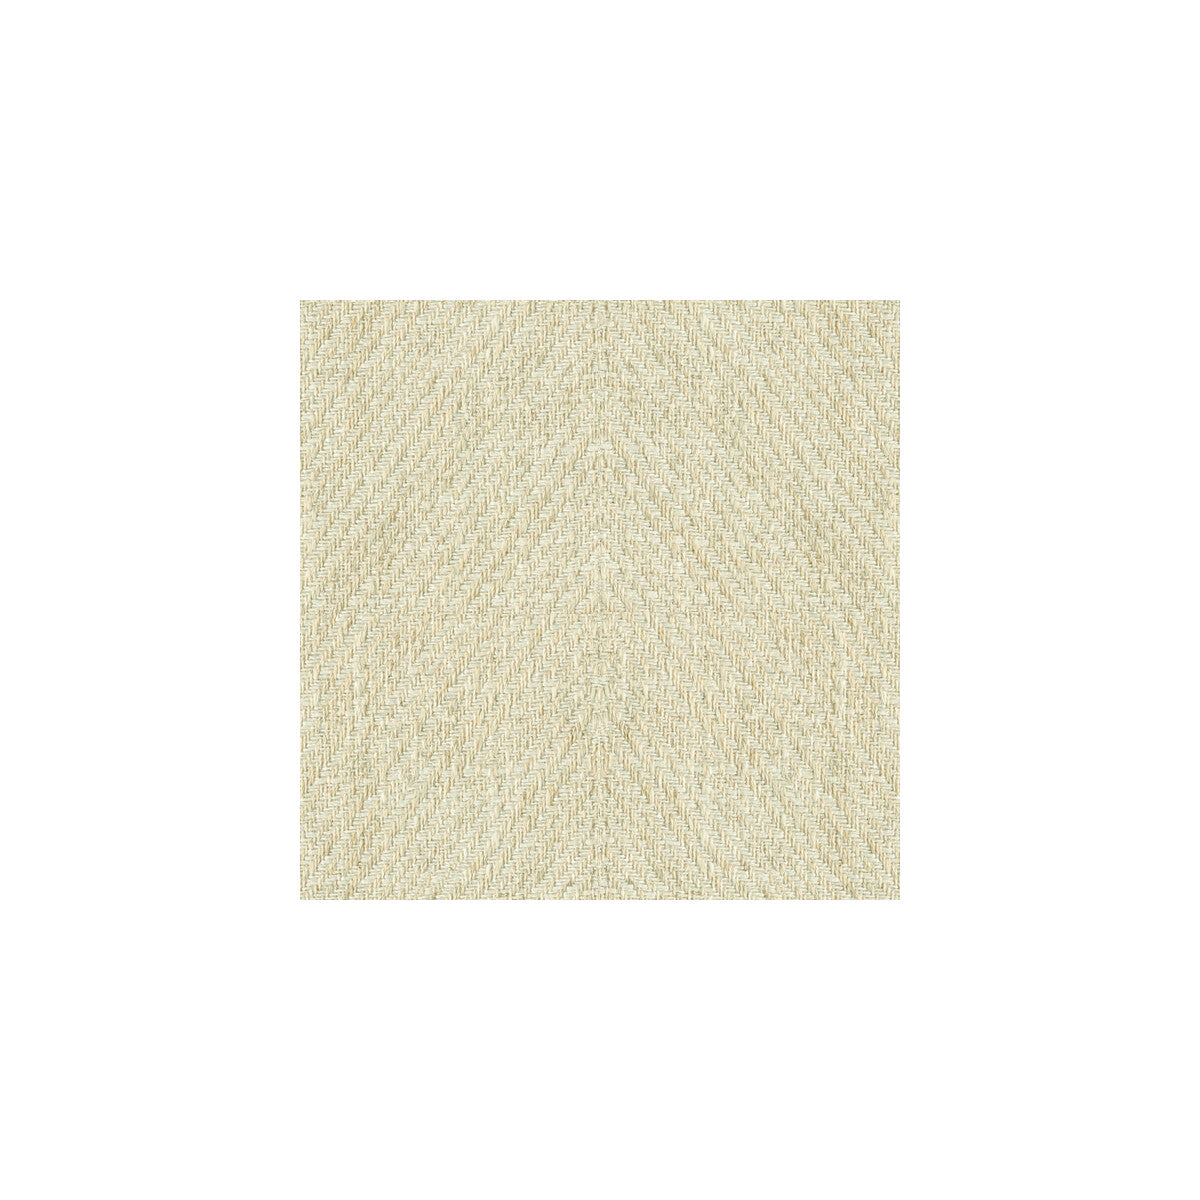 Soft Structure fabric in sand color - pattern 31212.16.0 - by Kravet Couture in the Nomad Chic collection